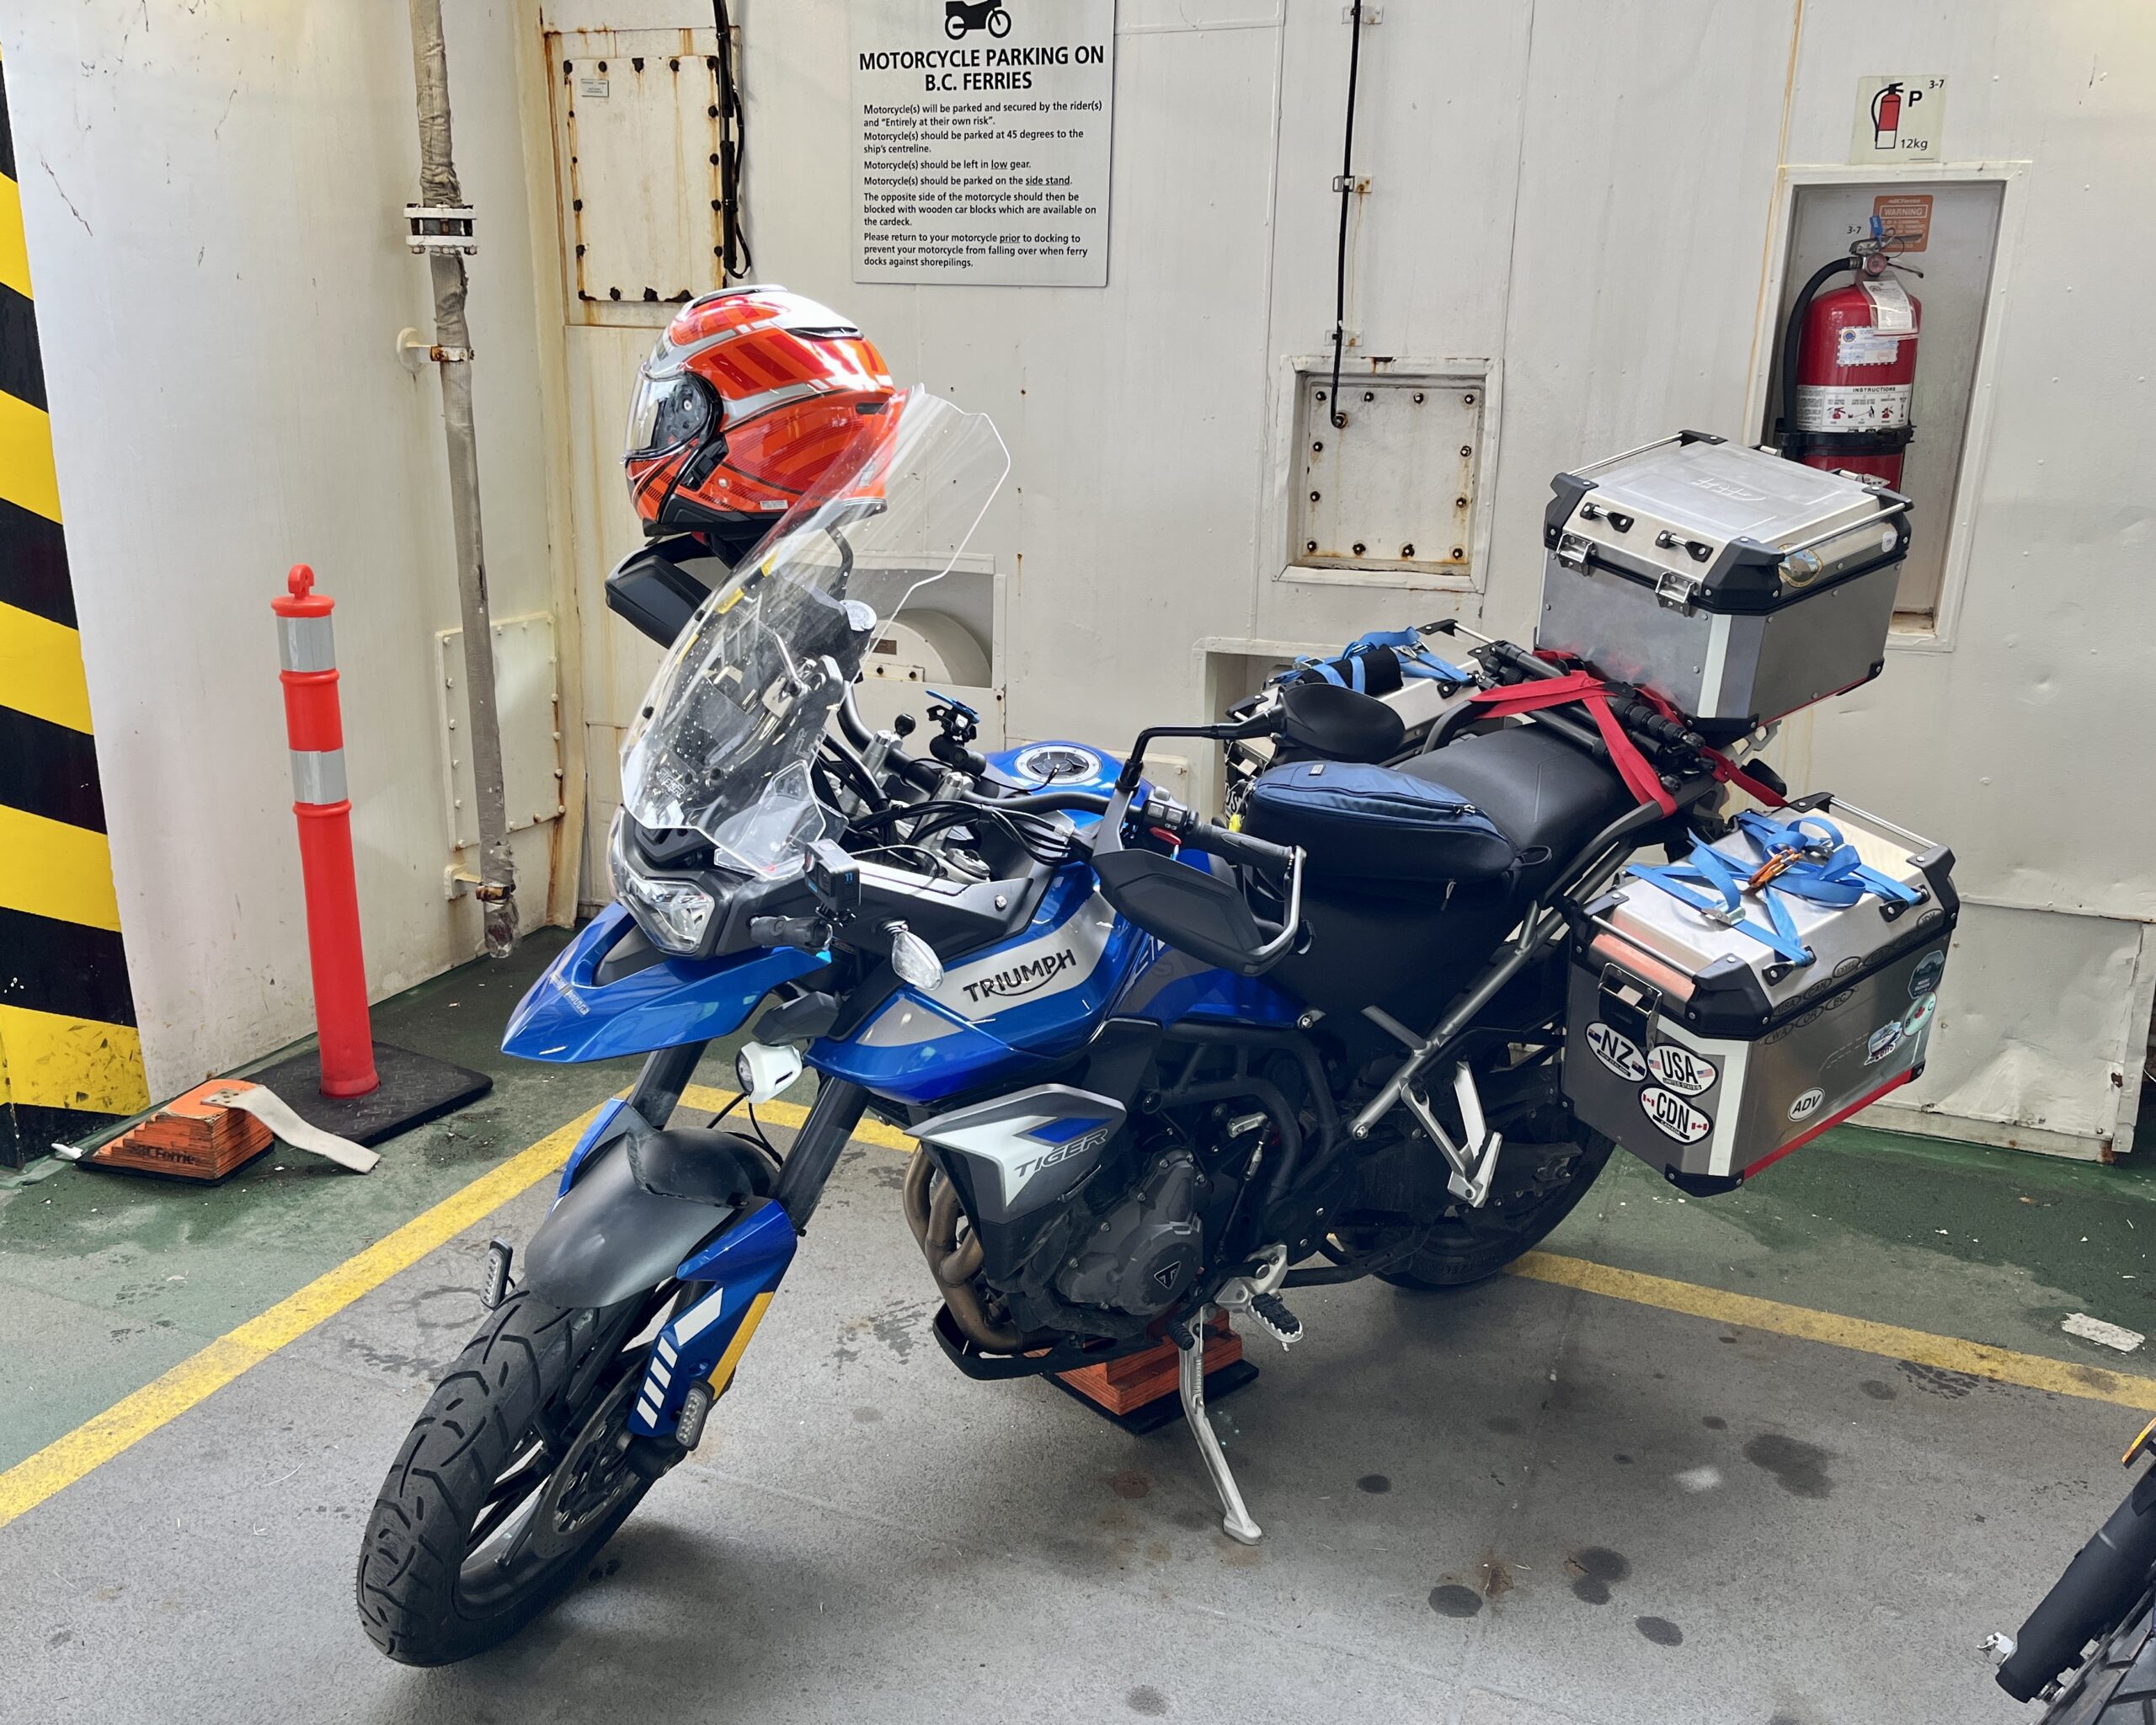 Motorcycle loaded on BC Ferries’ Salish Orca, from Comox to Powell River. Pretty simple loading with no need for tie downs or straps, just a chock on the high side.